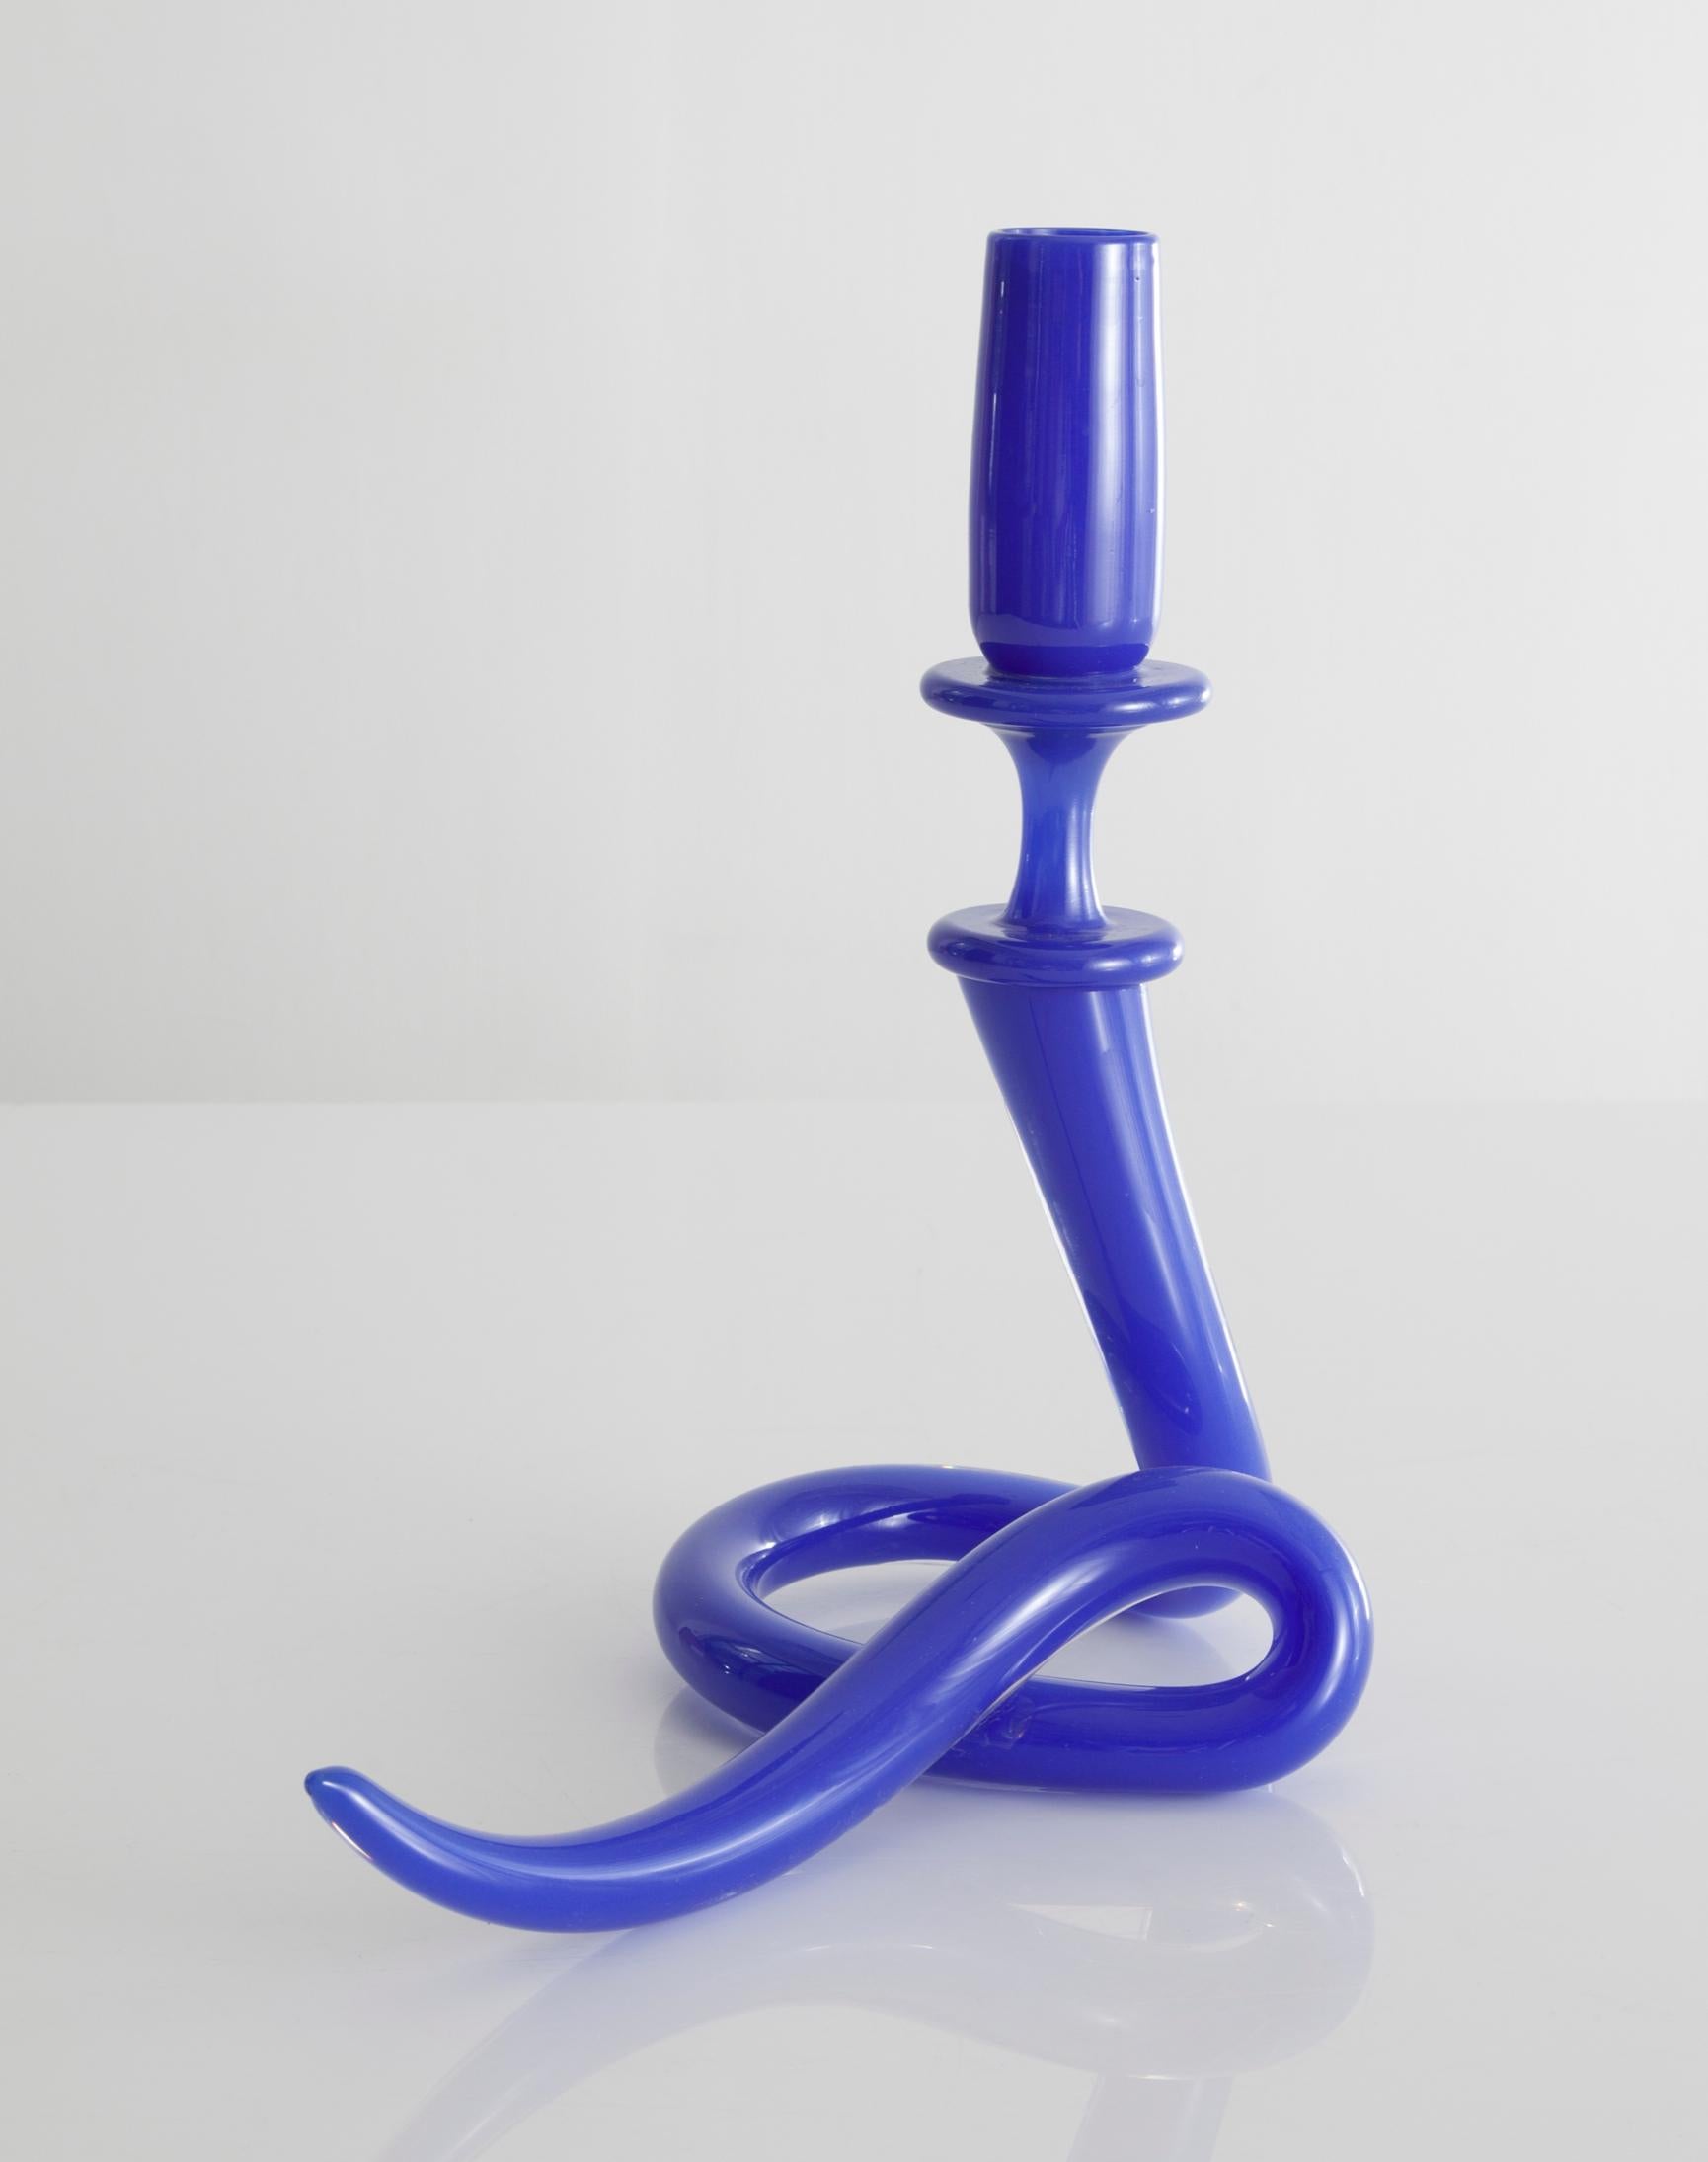 Unique single serpentine light sculpture in blue hand blown glass. Designed and made by Jeff Zimmerman, USA, 2014.

Limited number available. Please note that each item may differ slightly in color and shape.